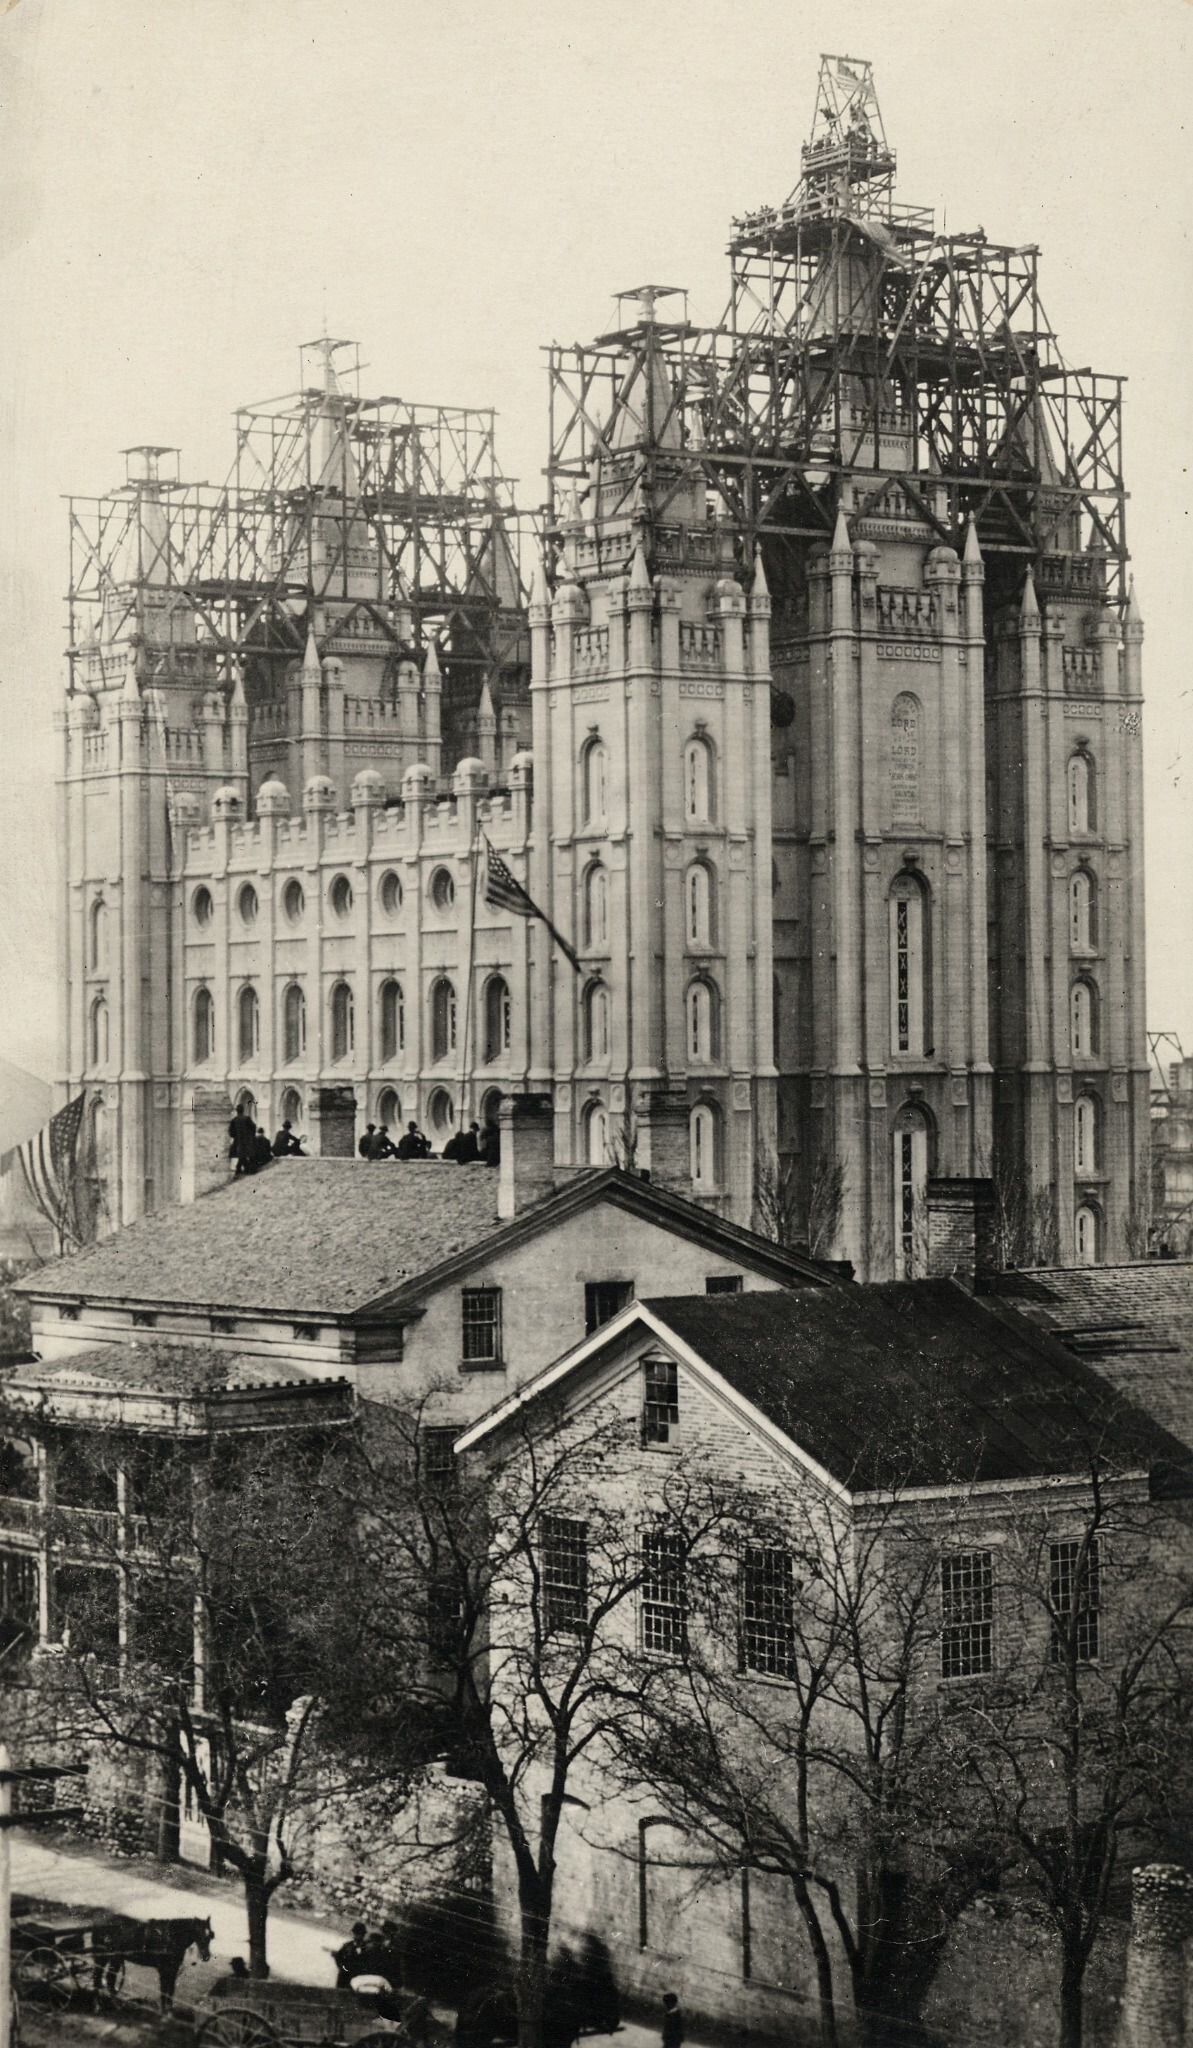 (photo courtesy The Church of Jesus Christ of Latter-day Saints) On April 6, 1892, a crowd of 30,000 people gathered around the Salt Lake Temple, with another 10,000 looking on from nearby streets, building roofs and trees, to witness the laying of the capstone.